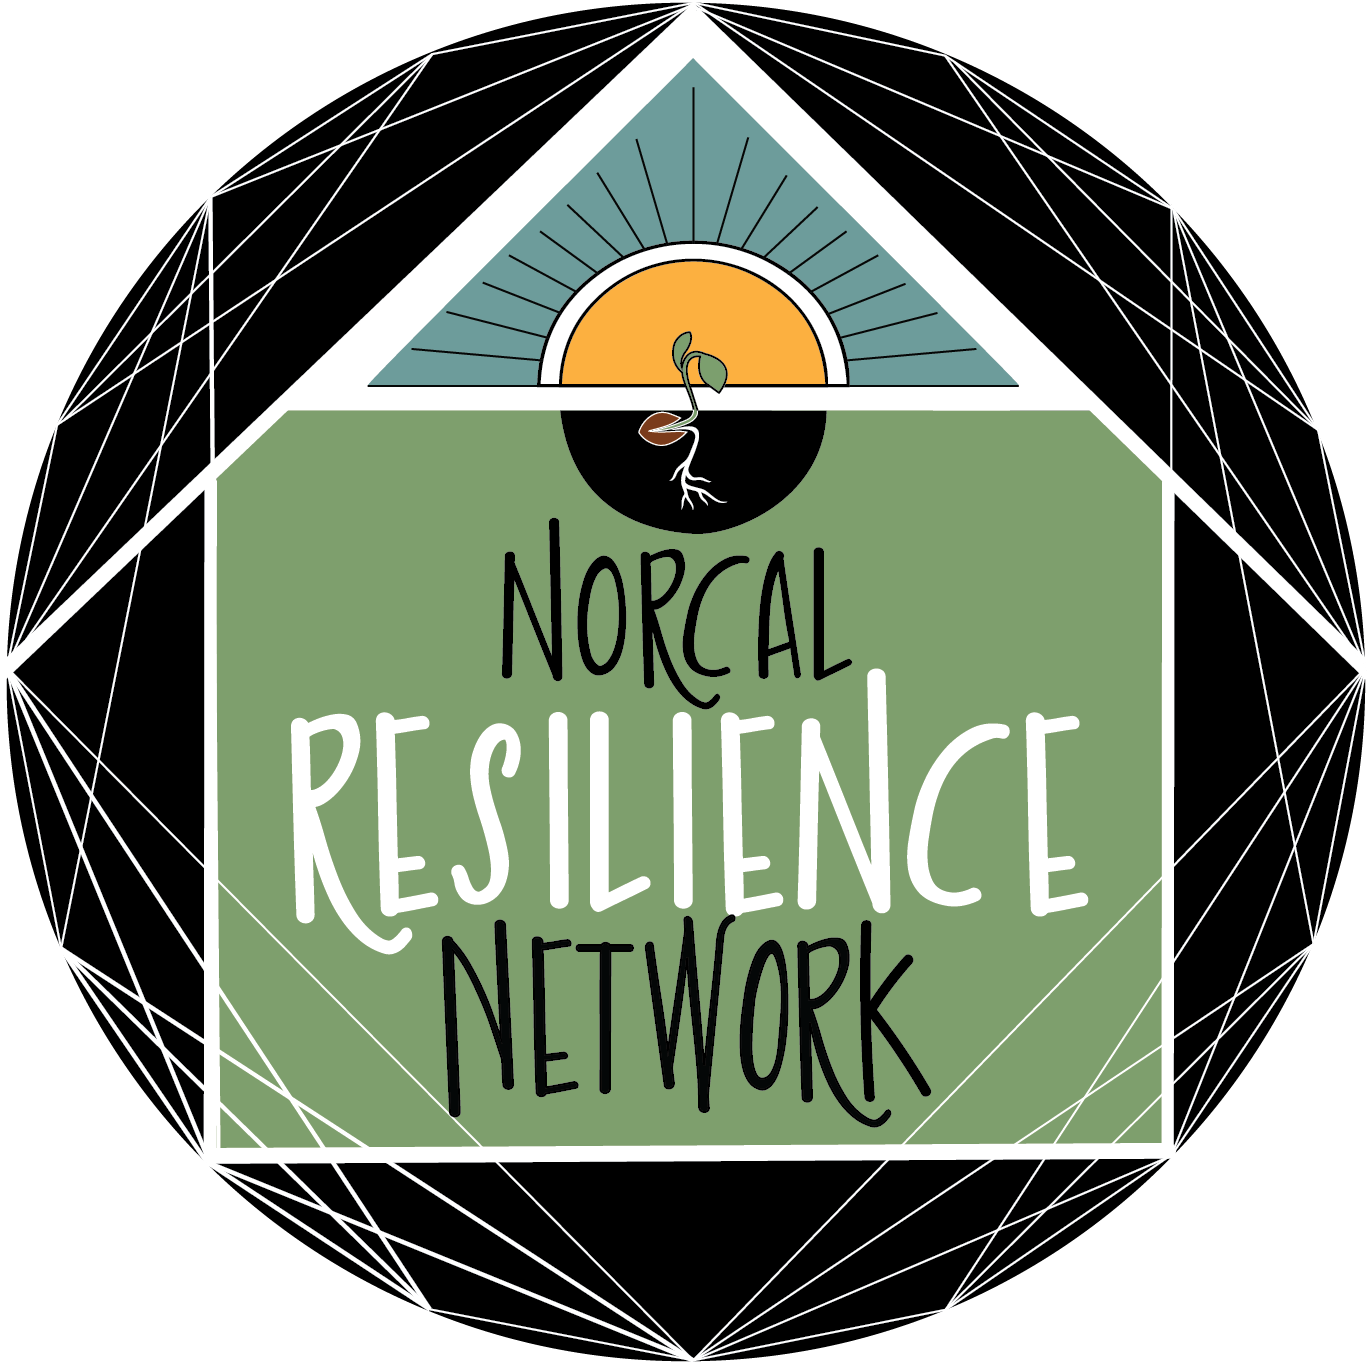 NorCal Resilience Network